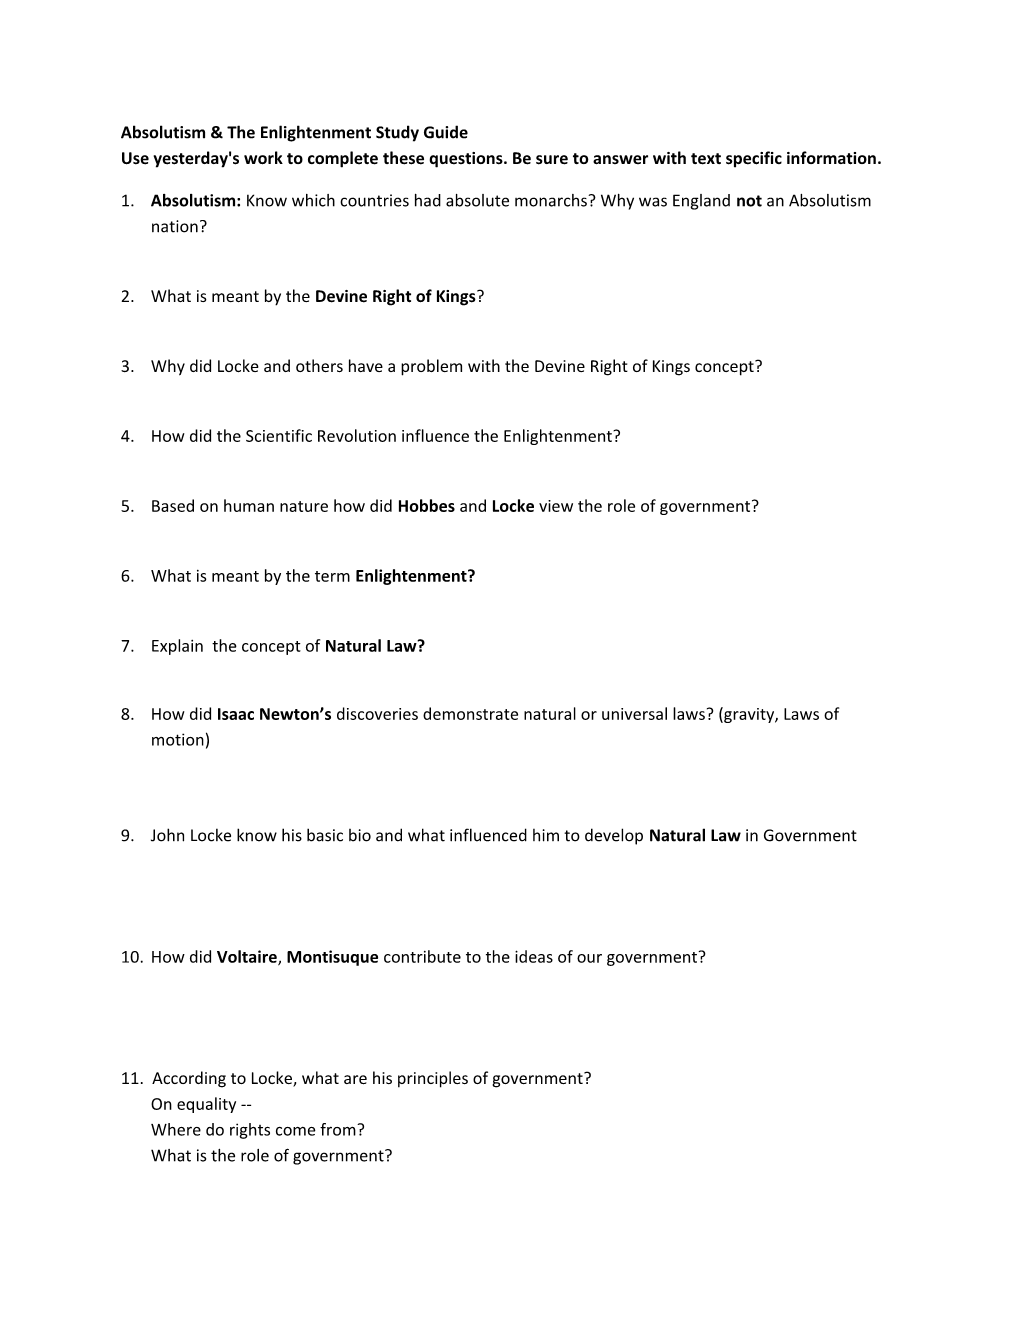 Absolutism & the Enlightenment Study Guide Use Yesterday's Work to Complete These Questions